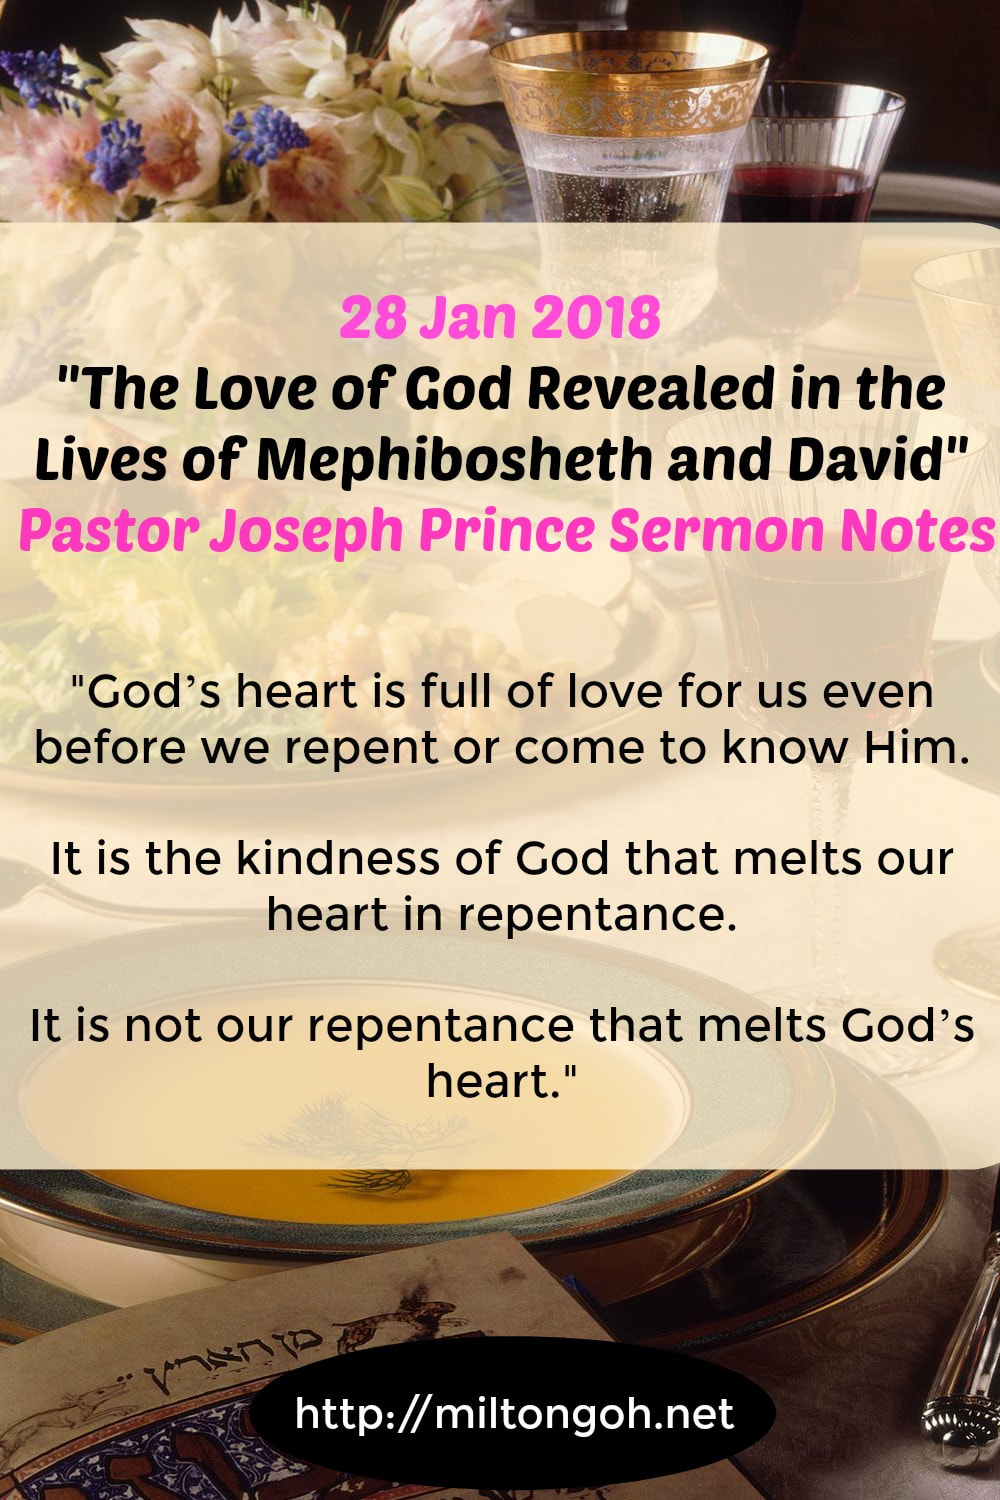 Pinterest Pinnable Image. Repin this image to share with your friends God's heart of love for us in this powerful story of Mephibosheth and David. Let God's goodness and grace transform their hearts to believe for good things from Him! 